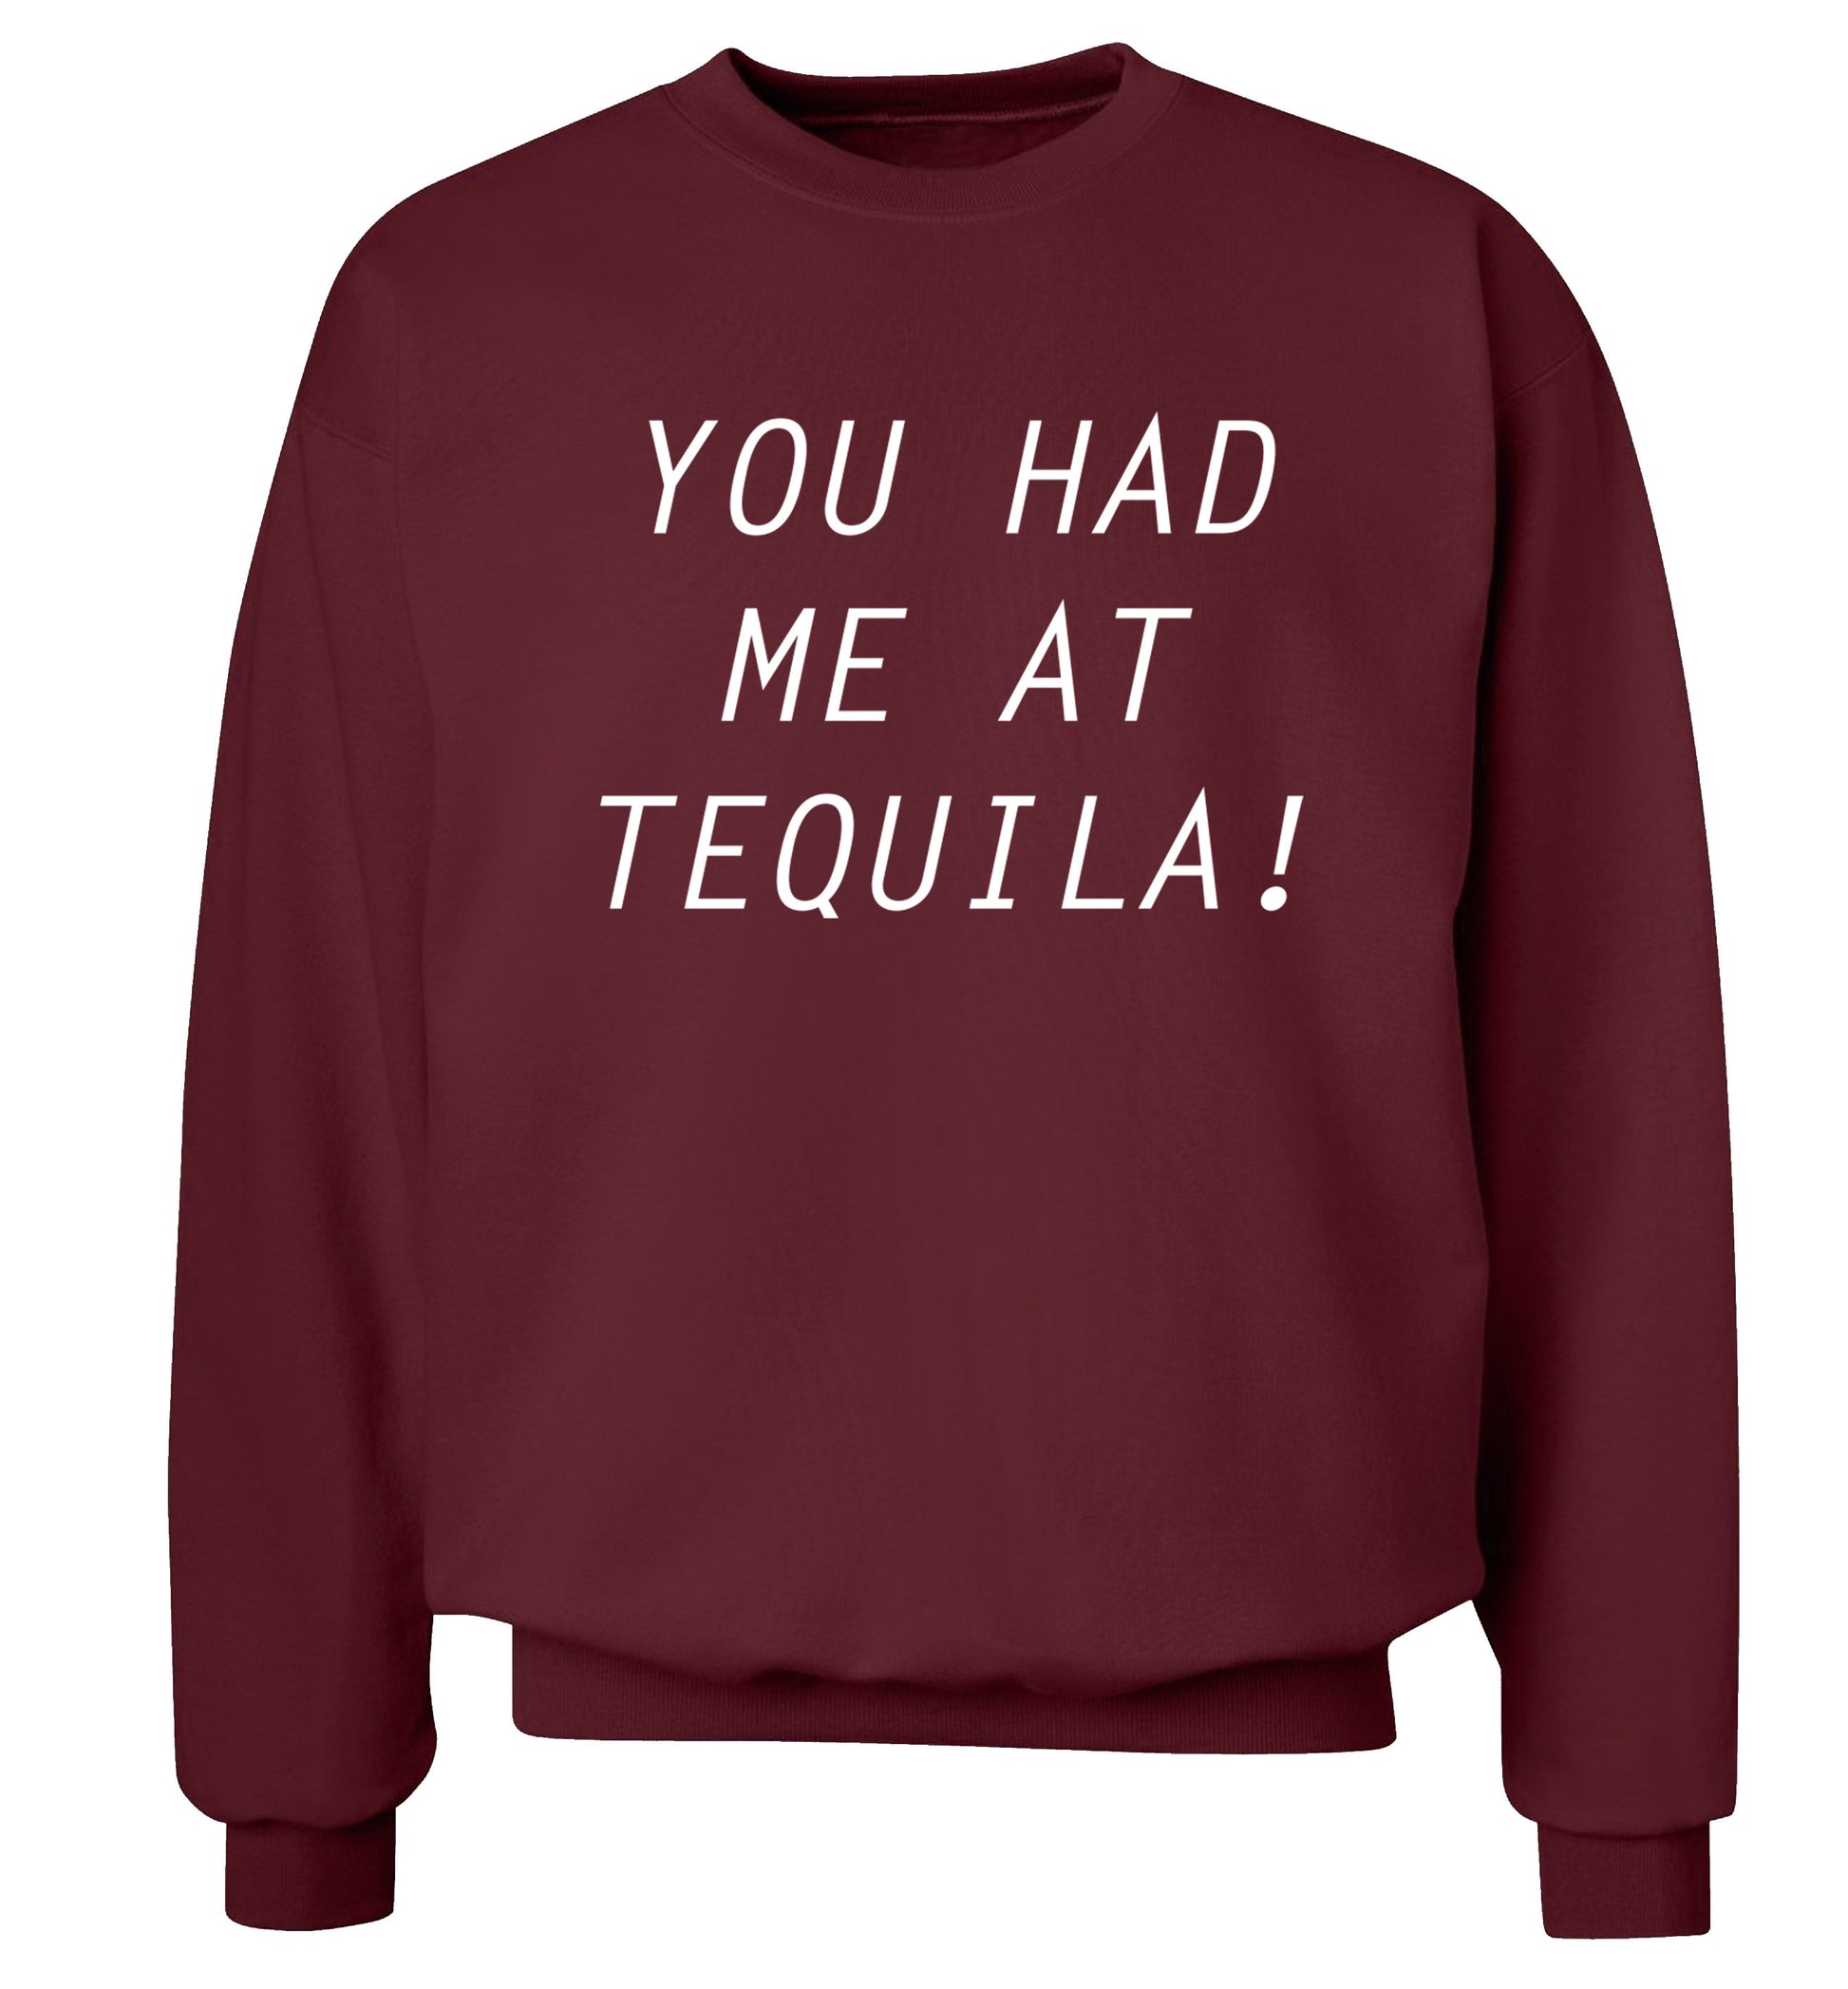 You had me at tequila Adult's unisex maroon Sweater 2XL